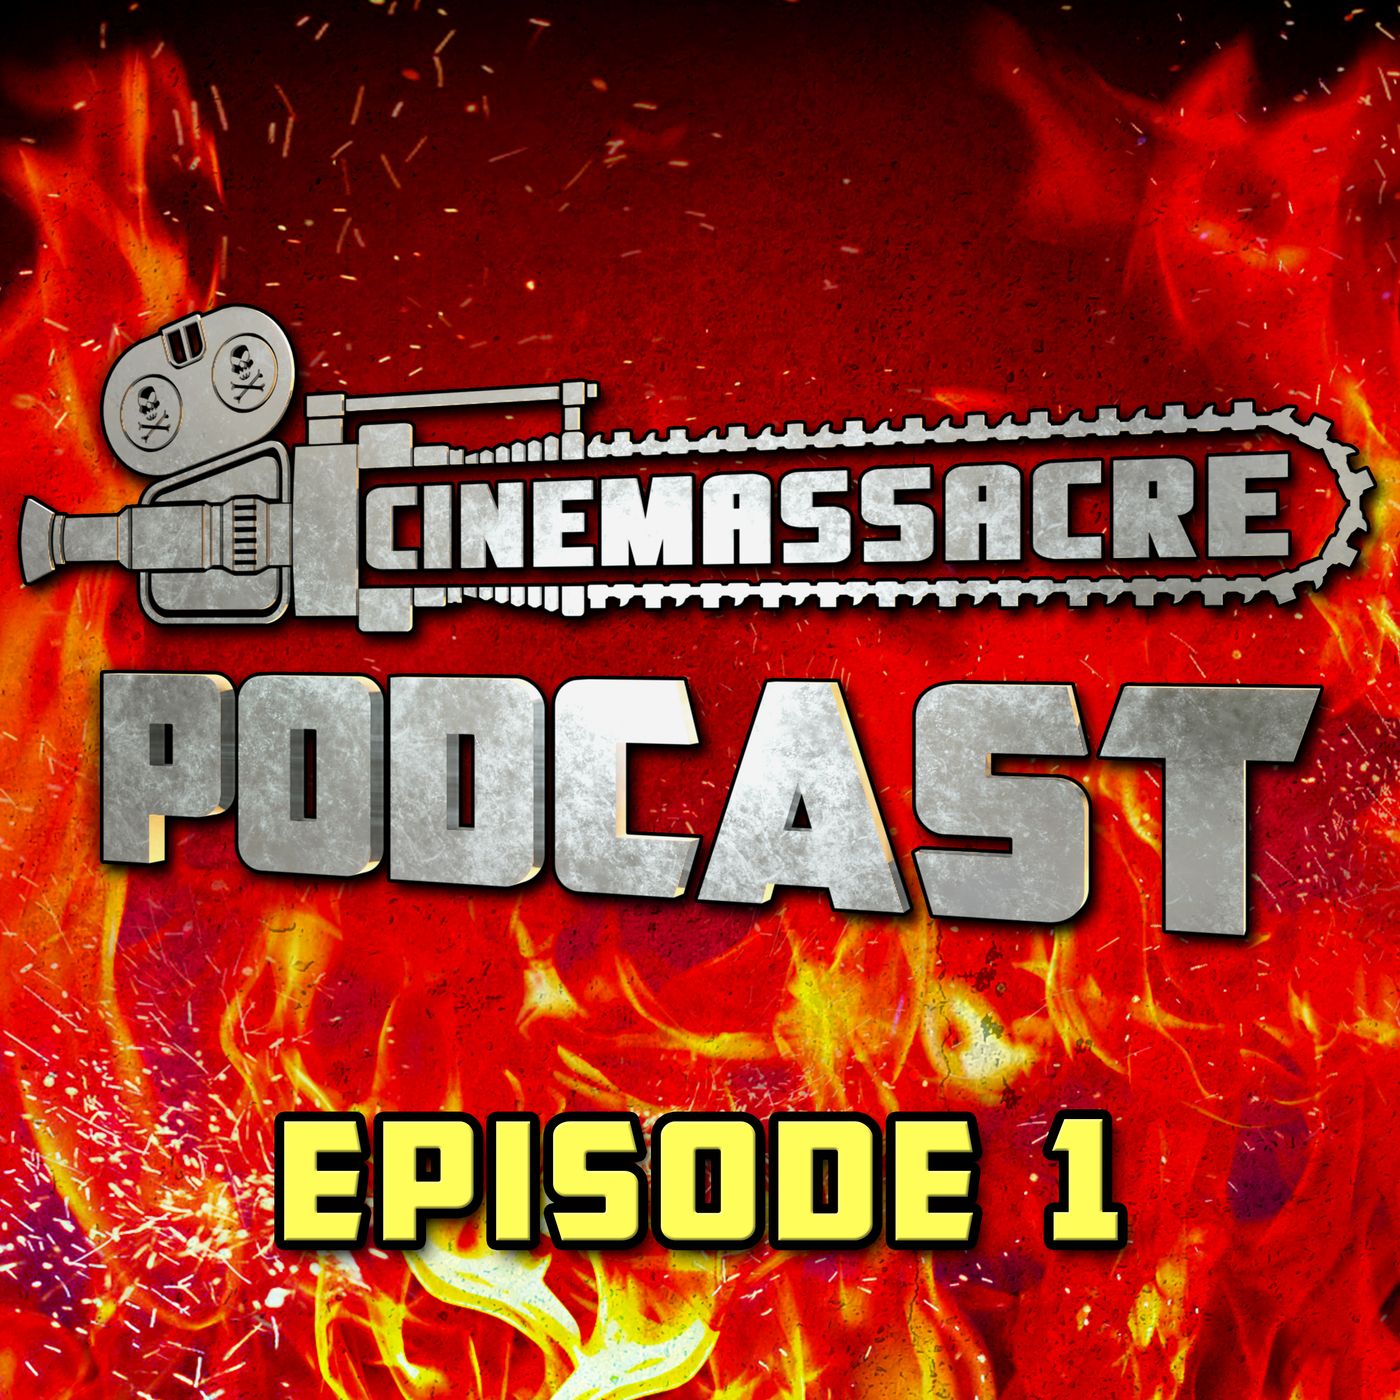 Fan Q&A, Starting a Band, and What We've Been Up To - #1 Cinemassacre Podcast